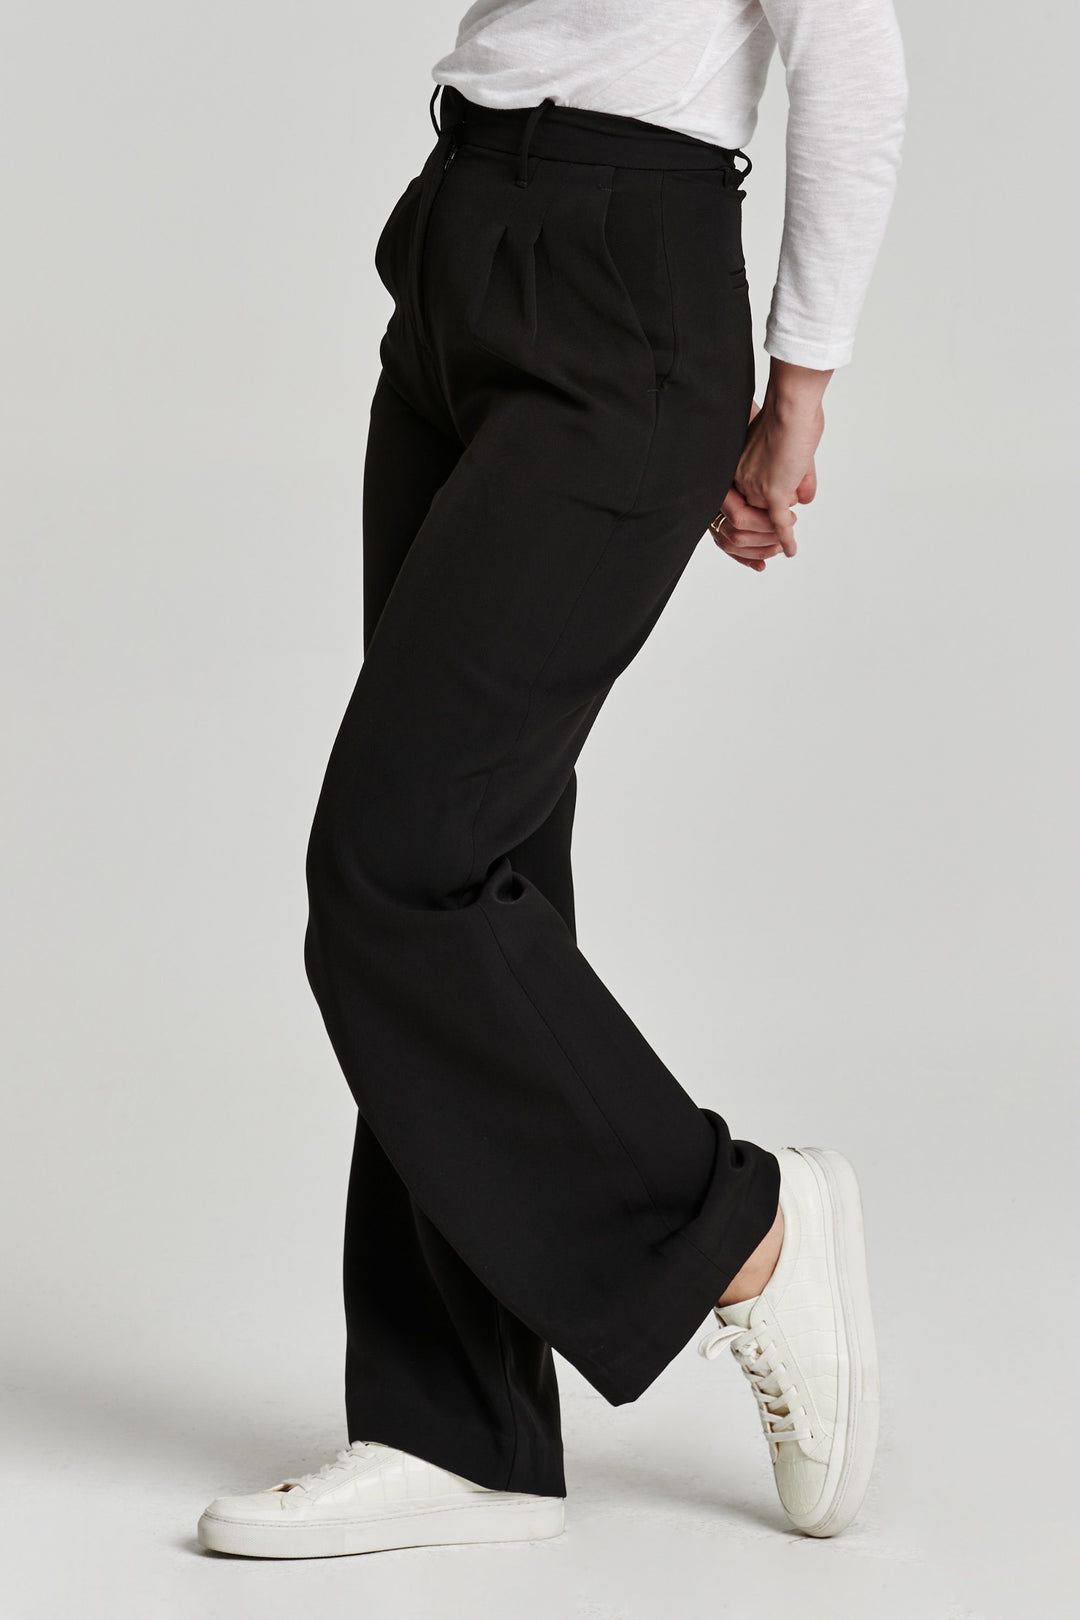 Another Love Adelaide Effortless Trouser